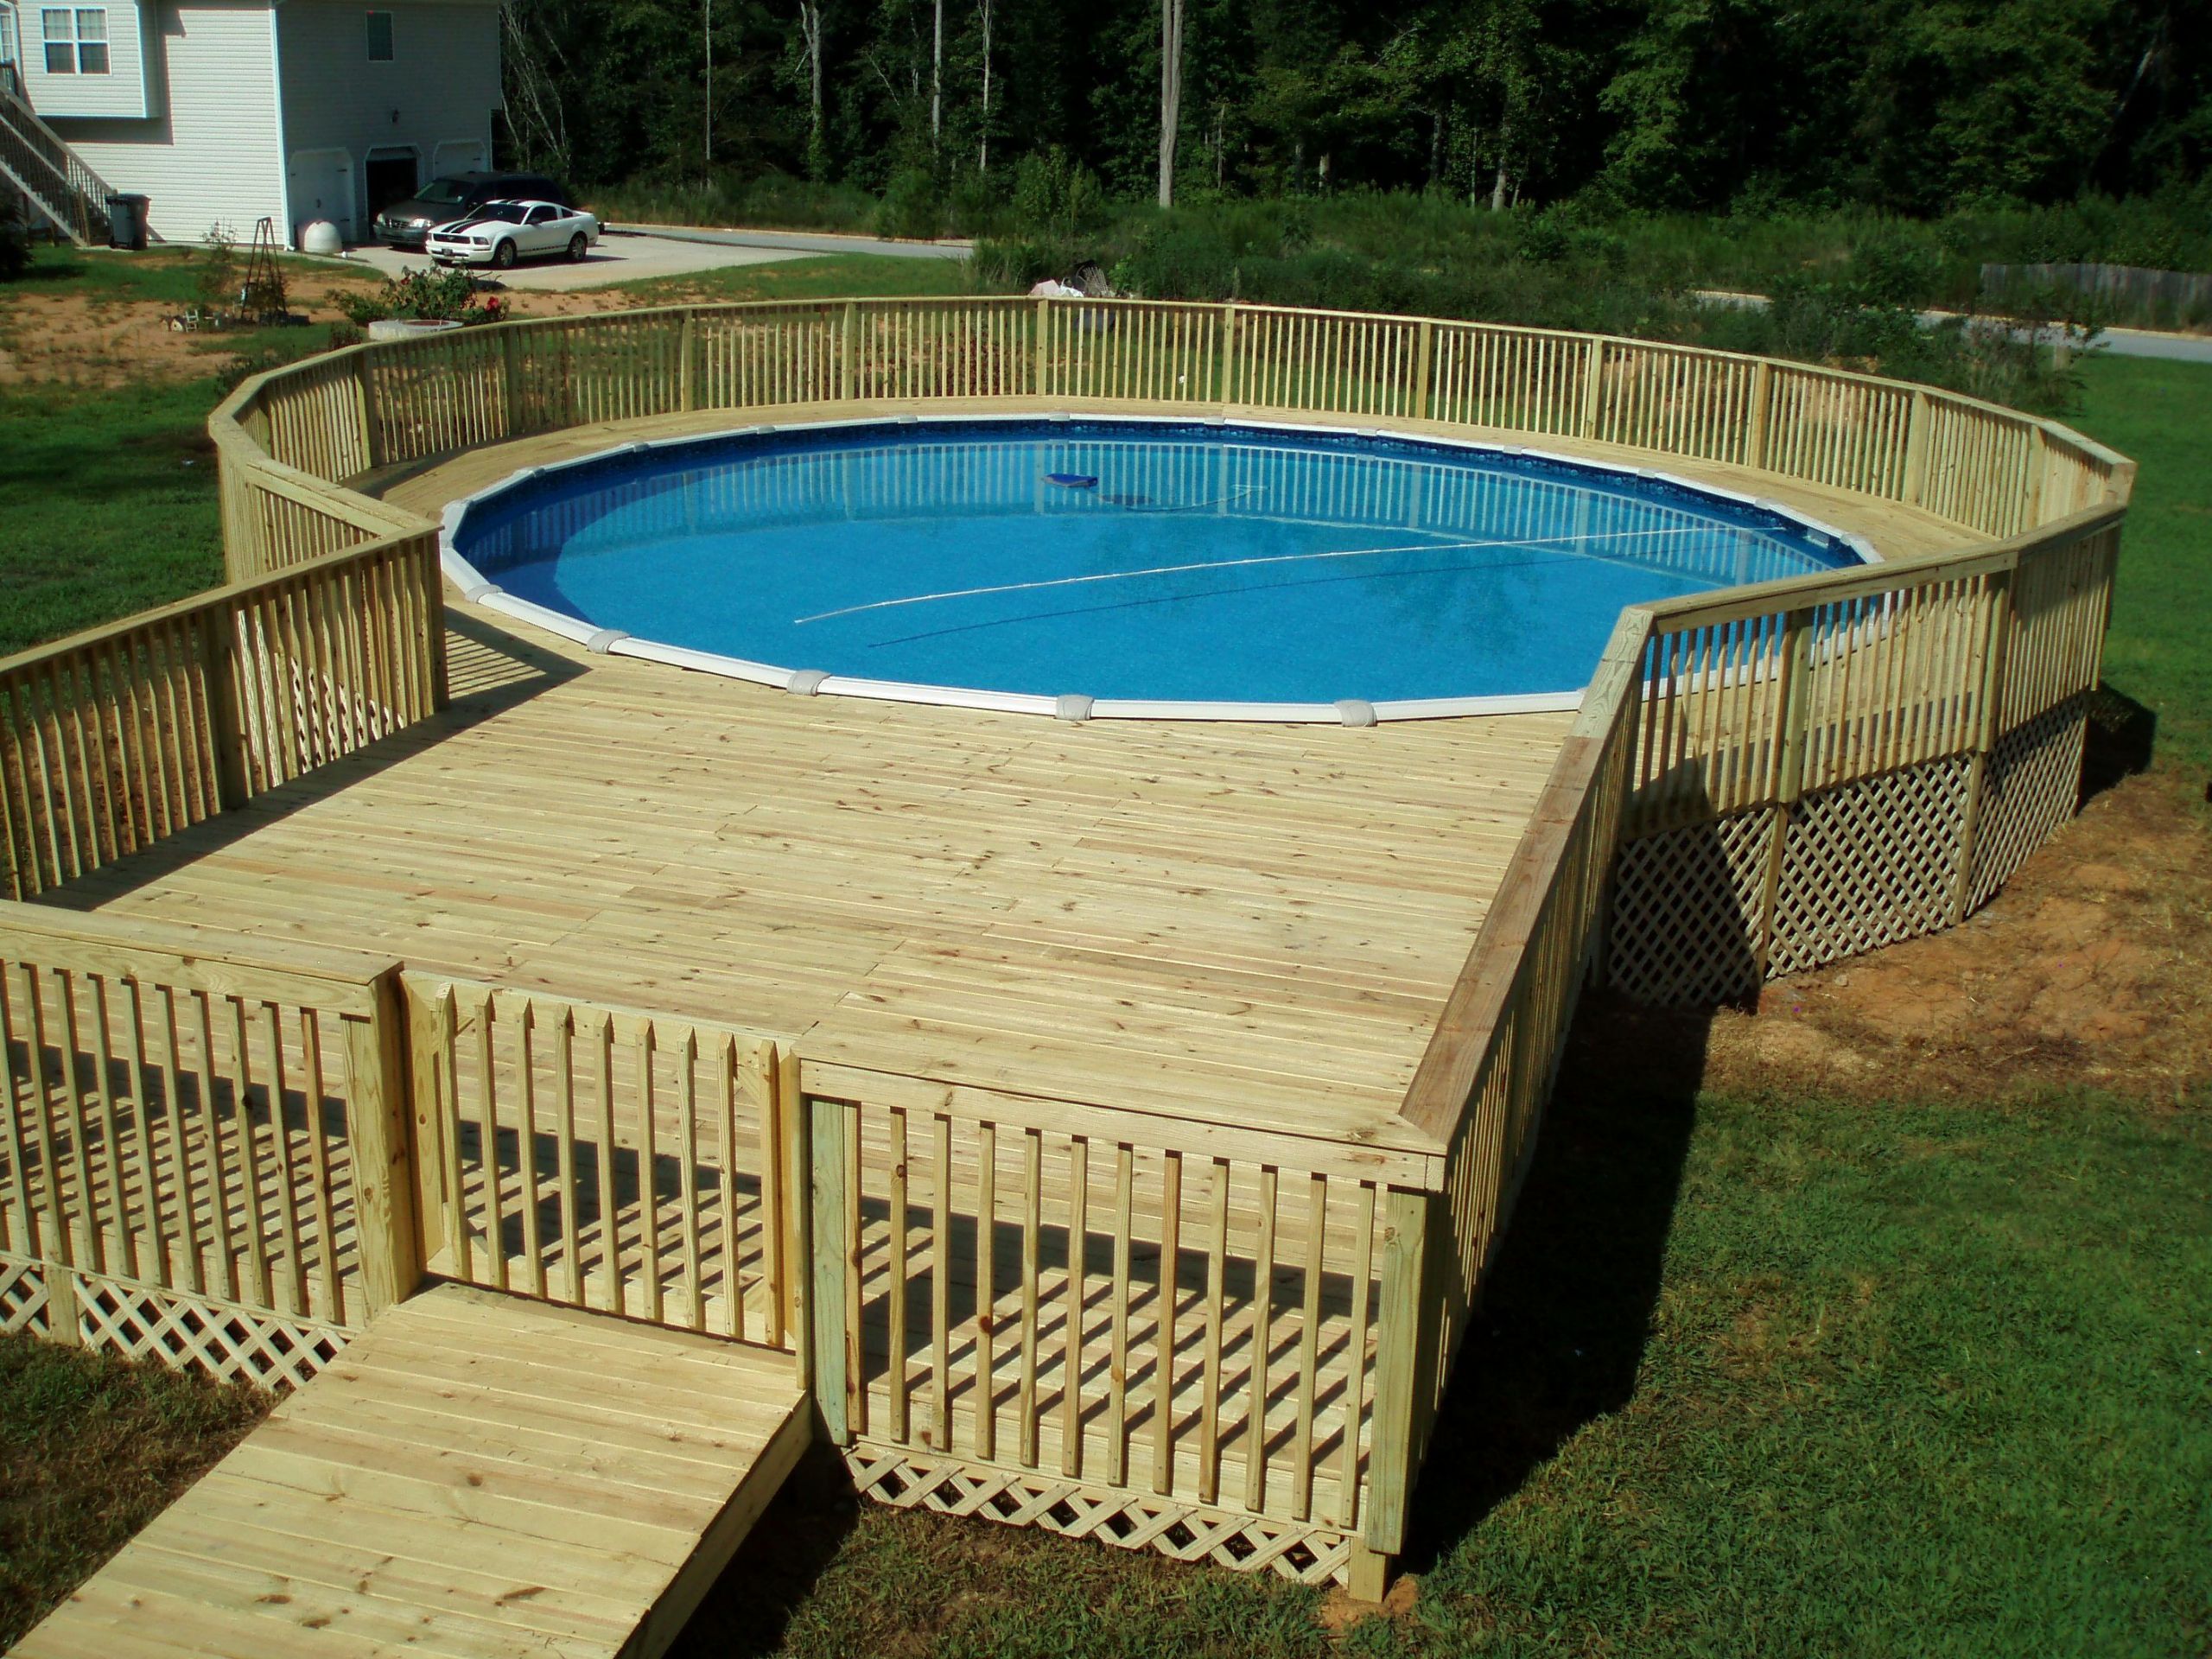 Diy Above Ground Pool Deck
 22 Amazing and Unique Ground Pool Ideas with Decks